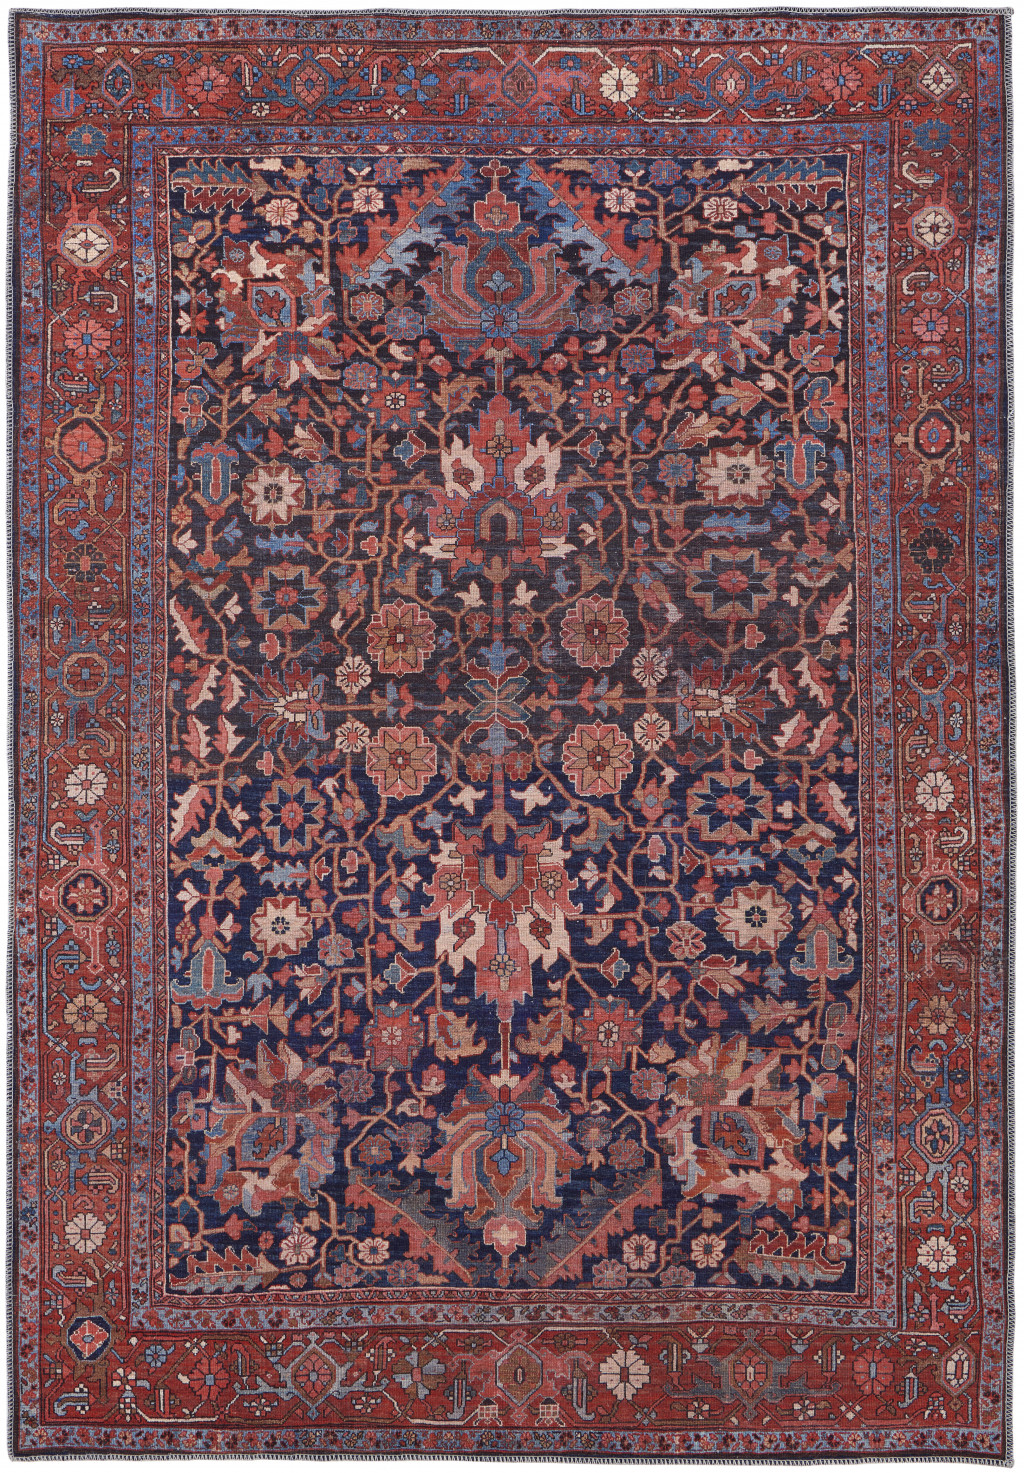 8' X 10' Red Orange And Blue Floral Power Loom Area Rug-515121-1